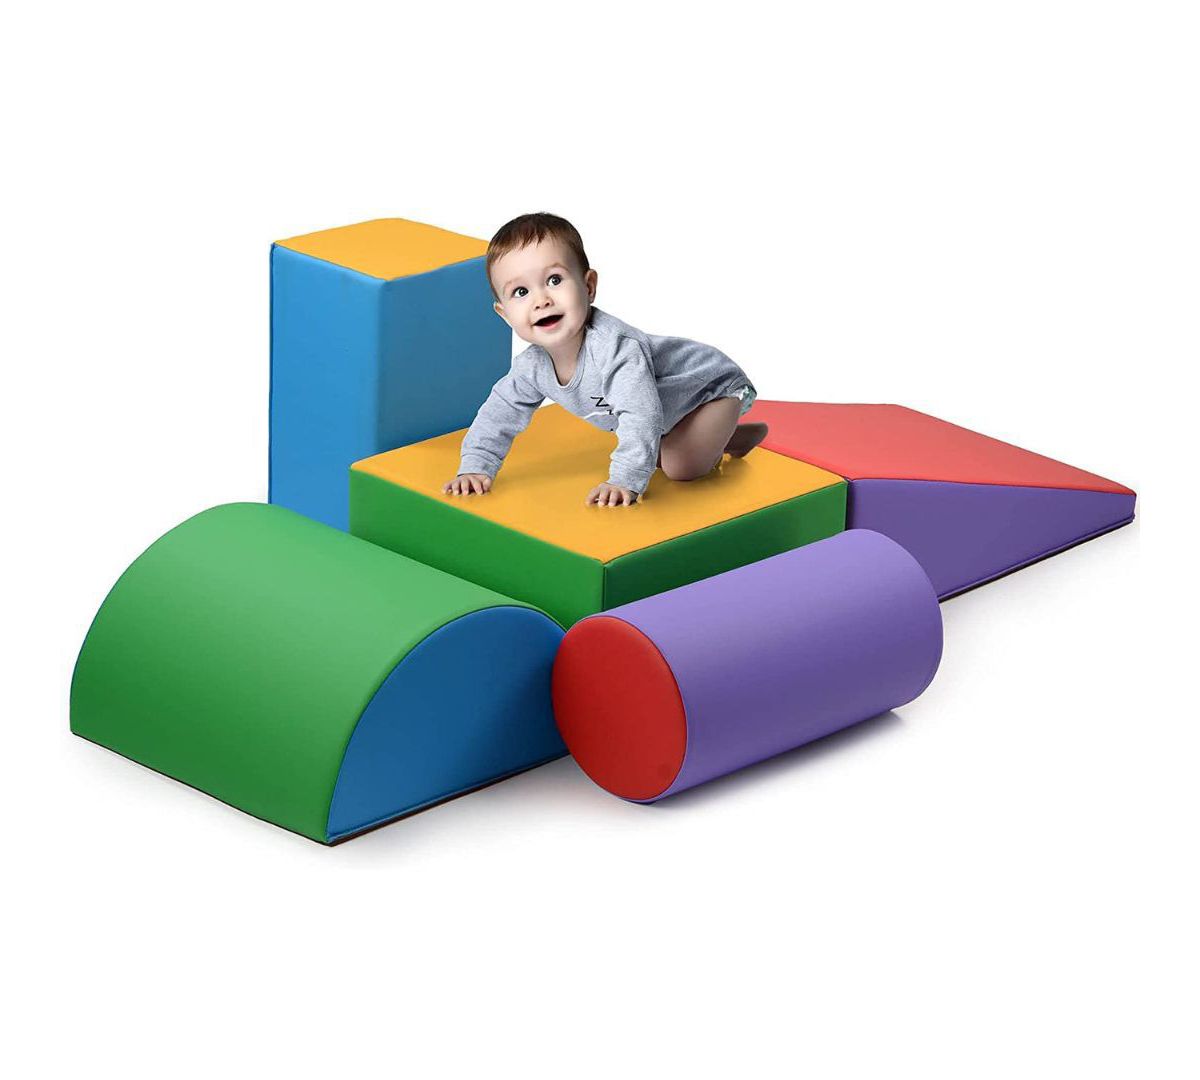 Climb and Crawl Activity Play Set - 5 Piece Climbing Foam Shape Toy for Toddler Play22